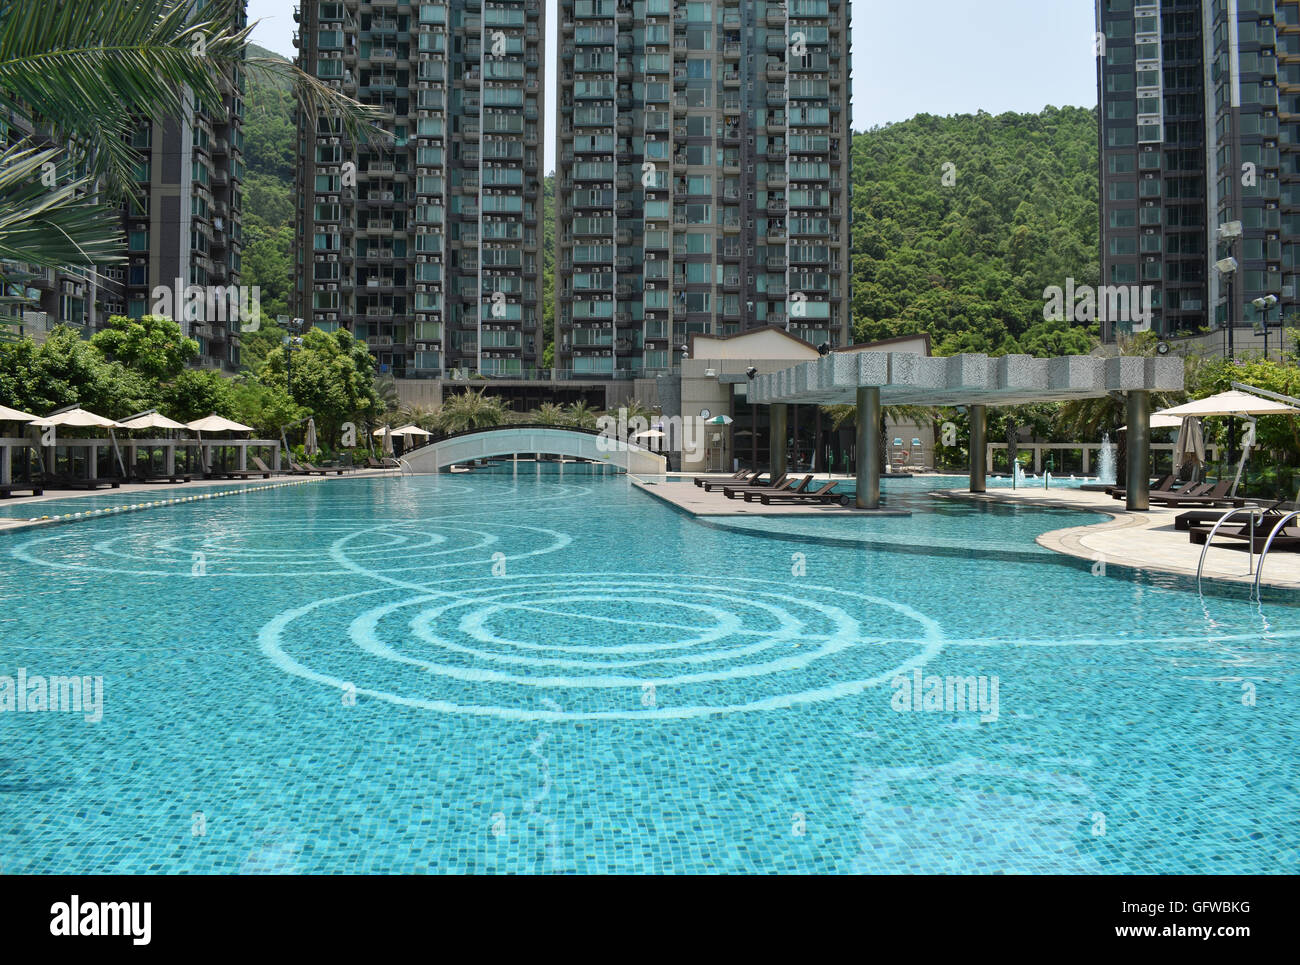 Outdoor swimming pool at an apartment complex Stock Photo